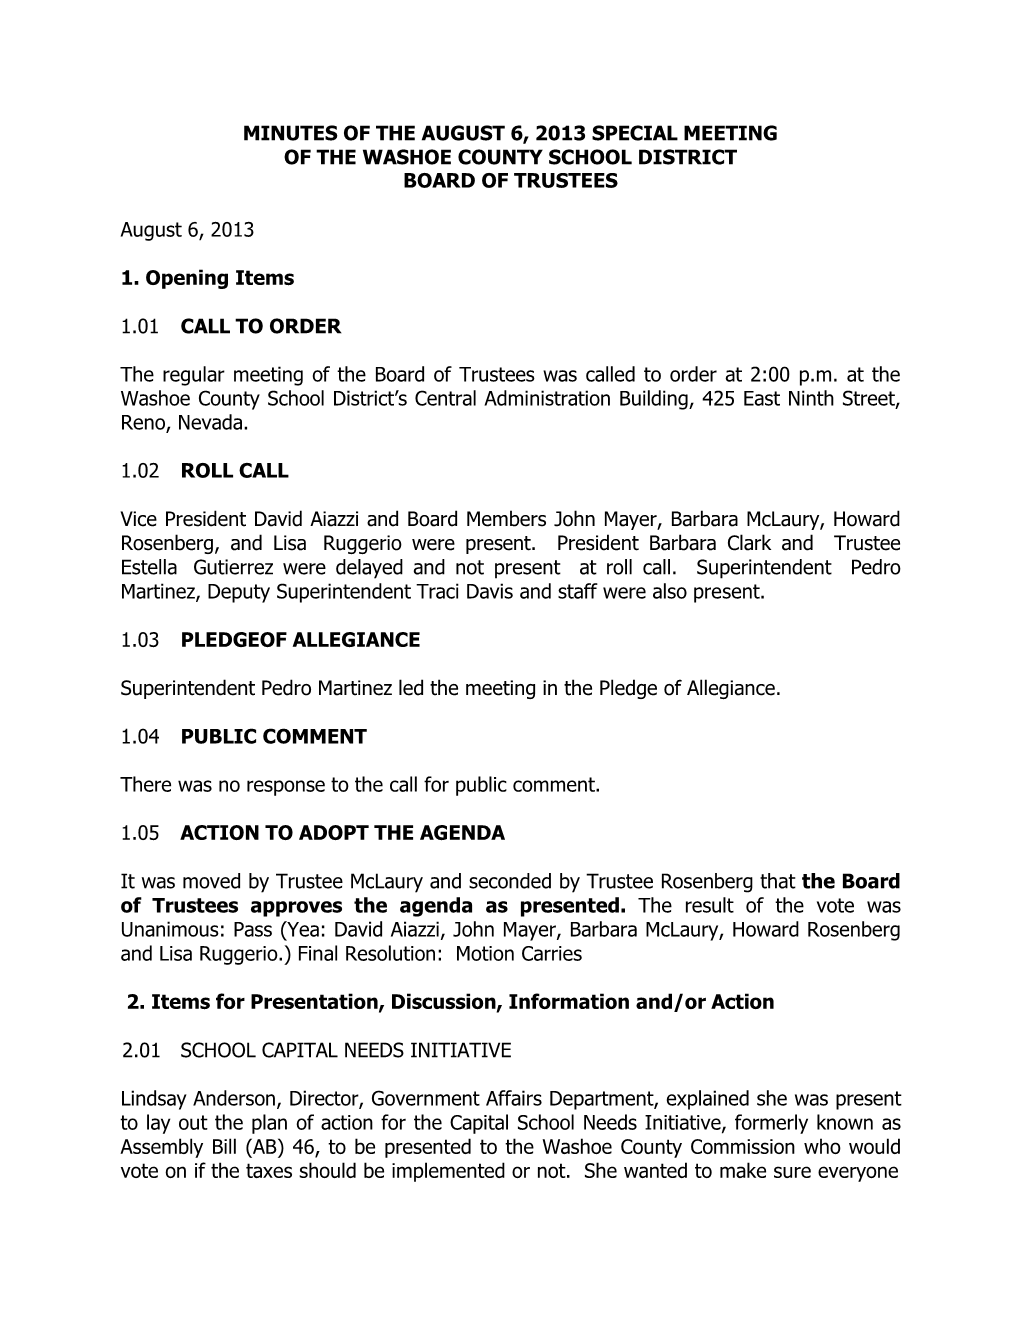 Minutes of the August 6, 2013 Special Meeting of the Washoe County School District Board of Trustees